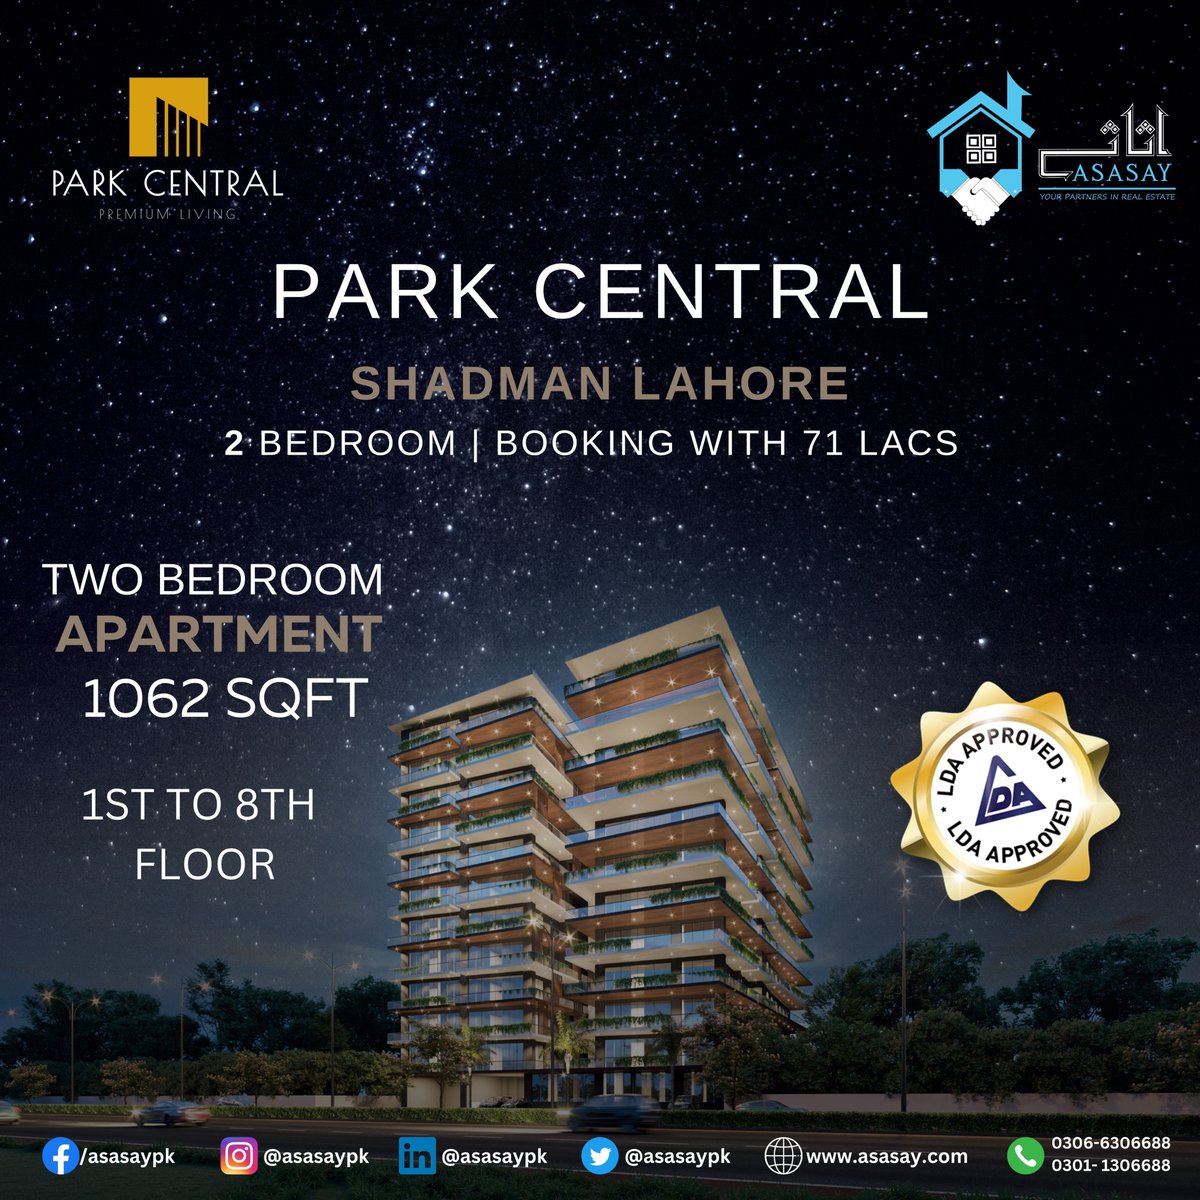 #LuxuryApartment 
716 sqft - 30% Down-payment
#ParkCentralLahore -Near Canal Road, in Shadman Lahore
LDA Approved 
Call
+923066306688
#ParkCentral #urbanliving #modern #asasay #asasayestate #asasayproperties #Lahore  #Punjab #Pakistan #lahorediaries #lahorepakistan